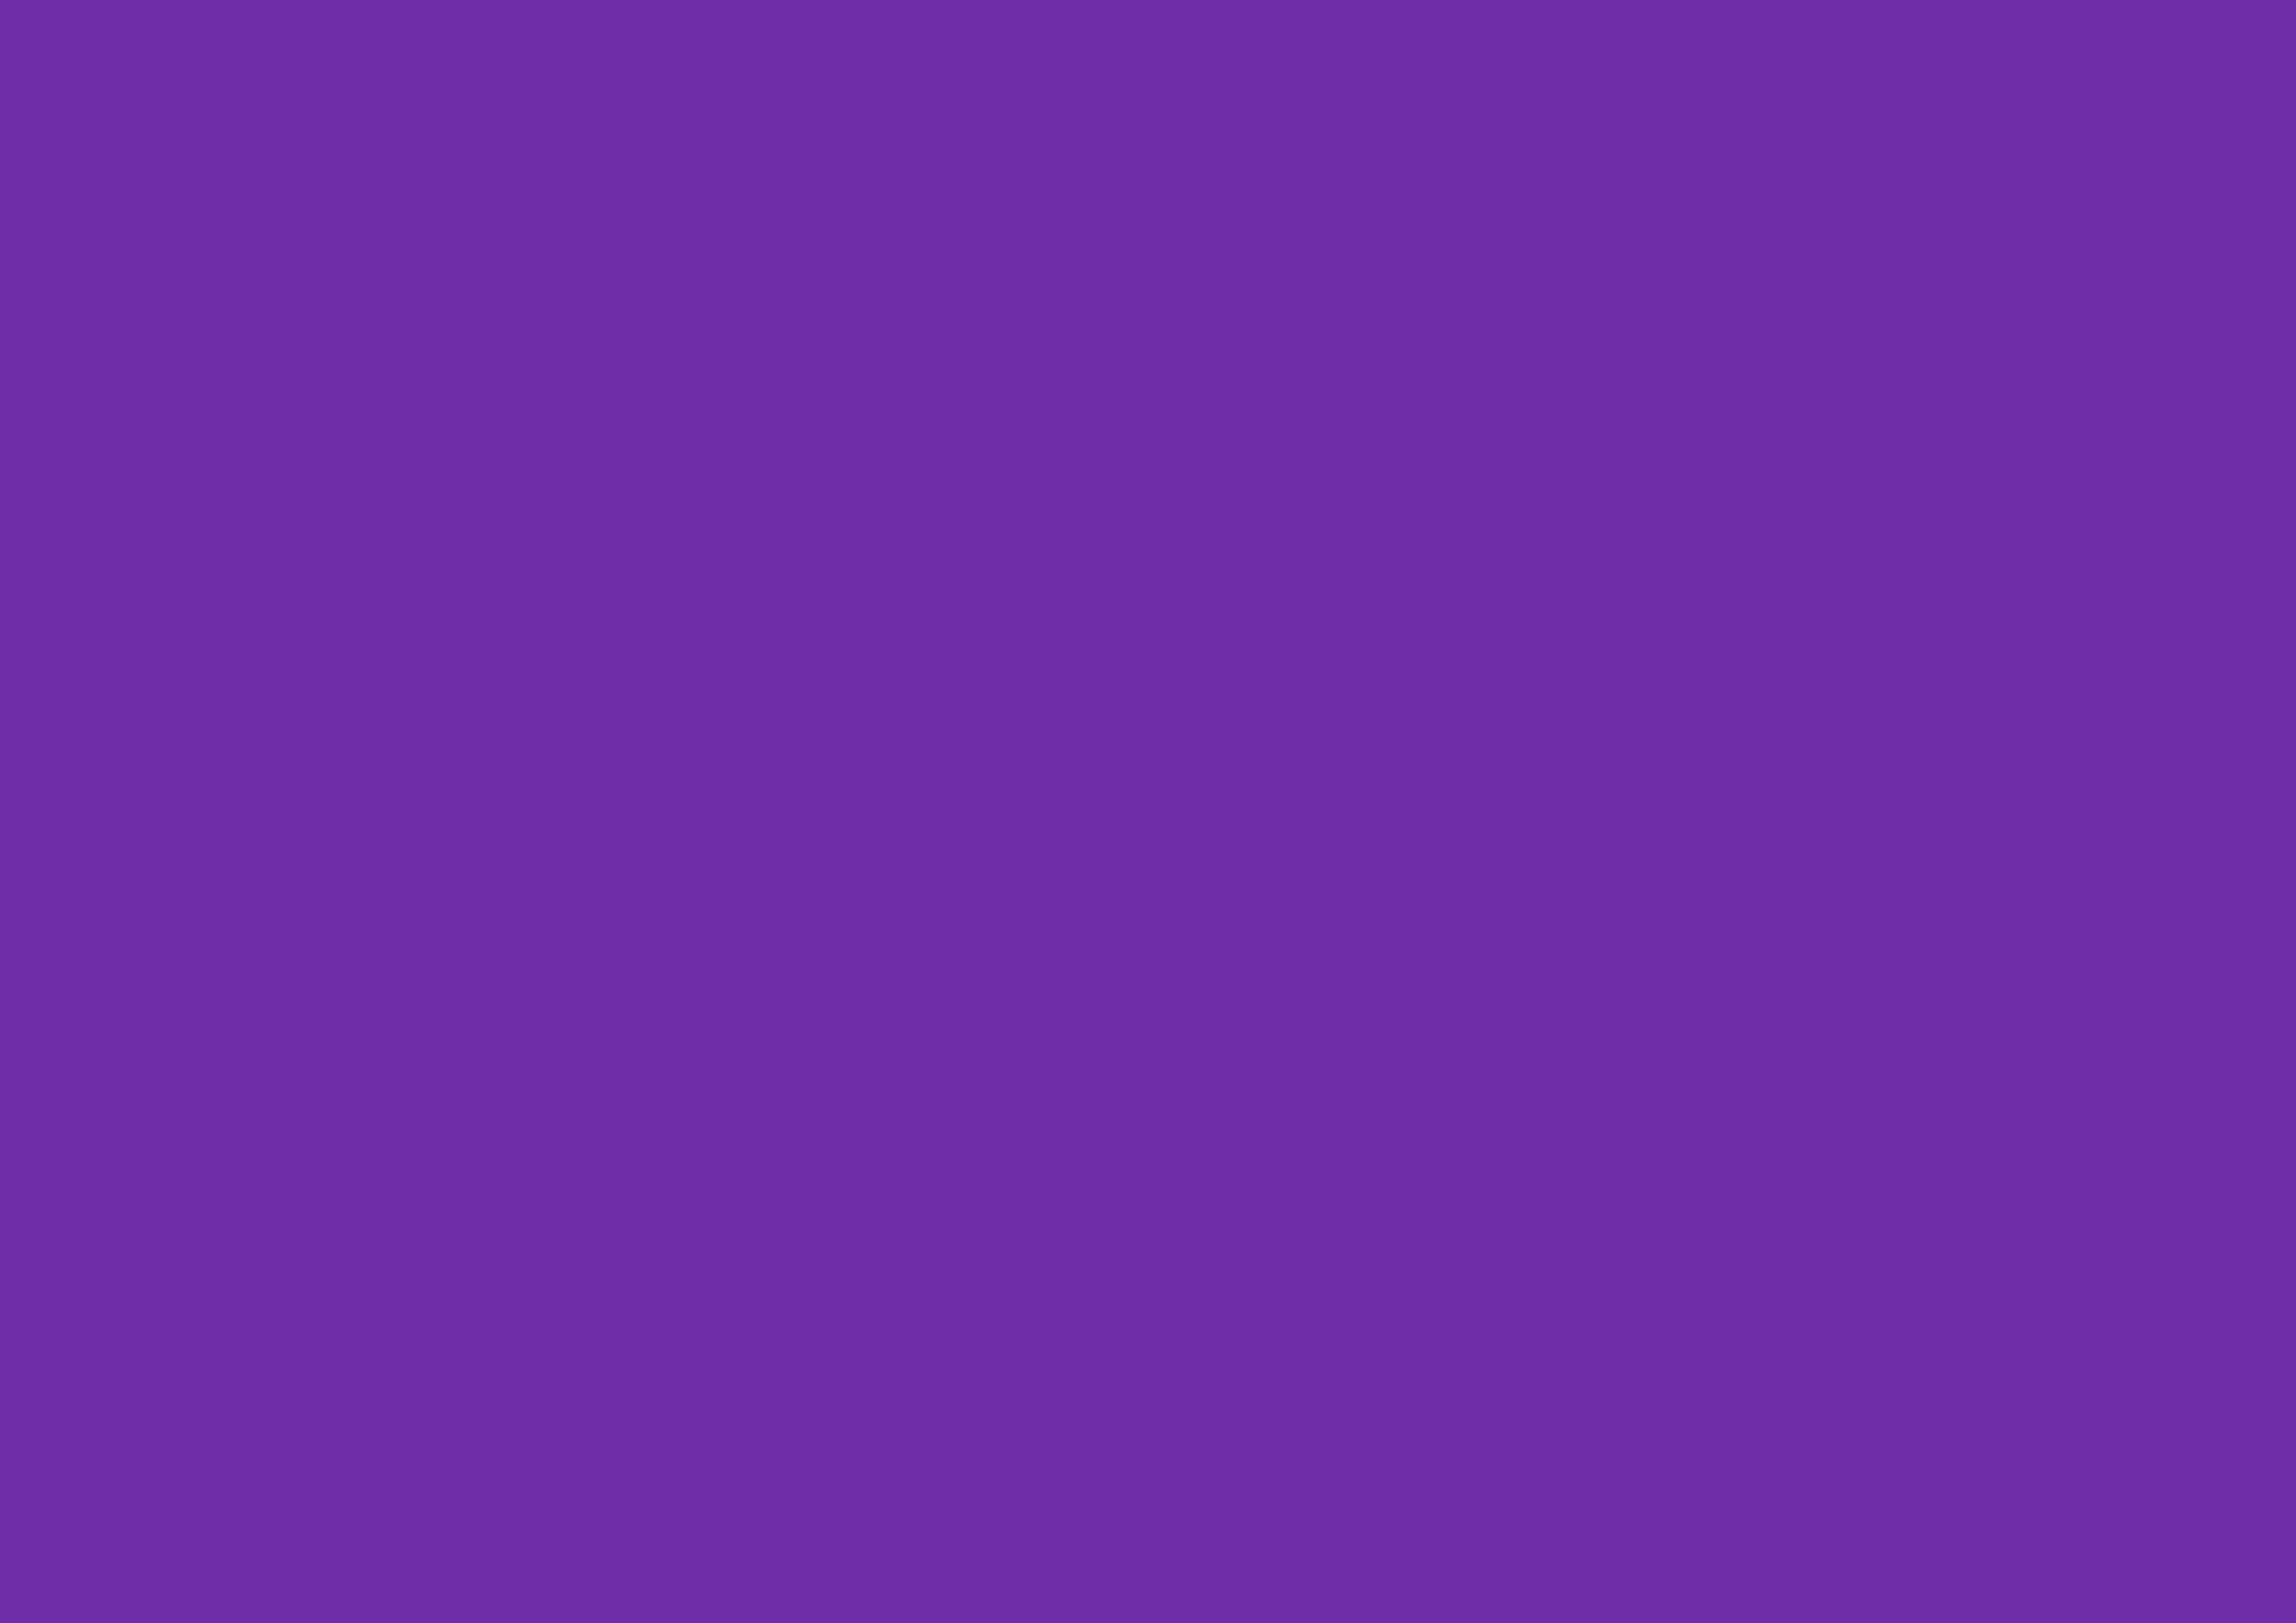 3508x2480 Grape Solid Color Background